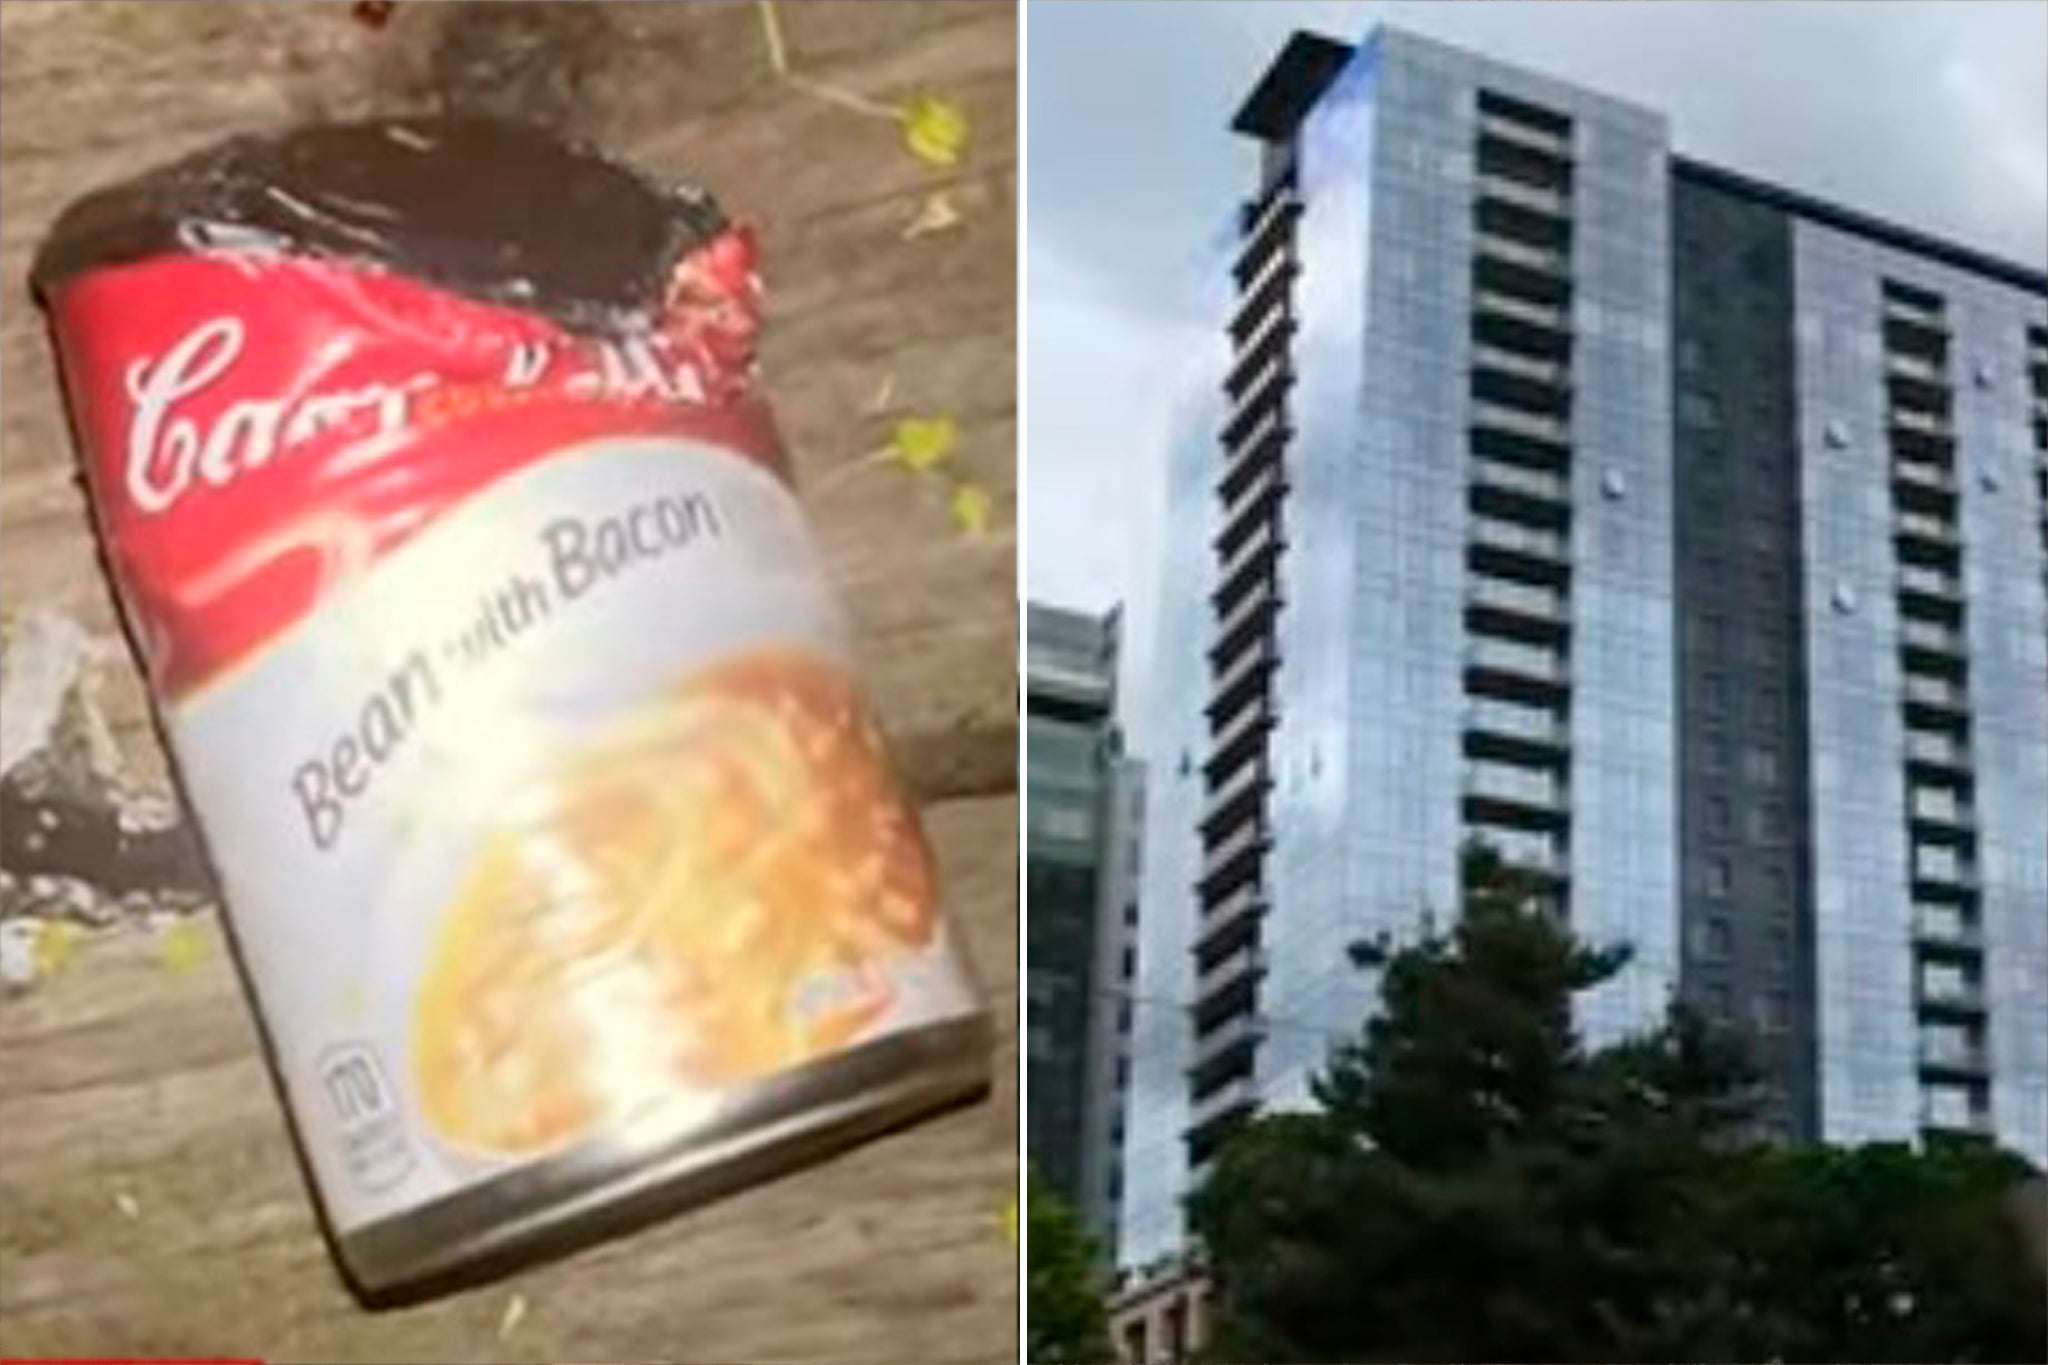 Tins of food are being hurled off a highrise in Downtown Portland